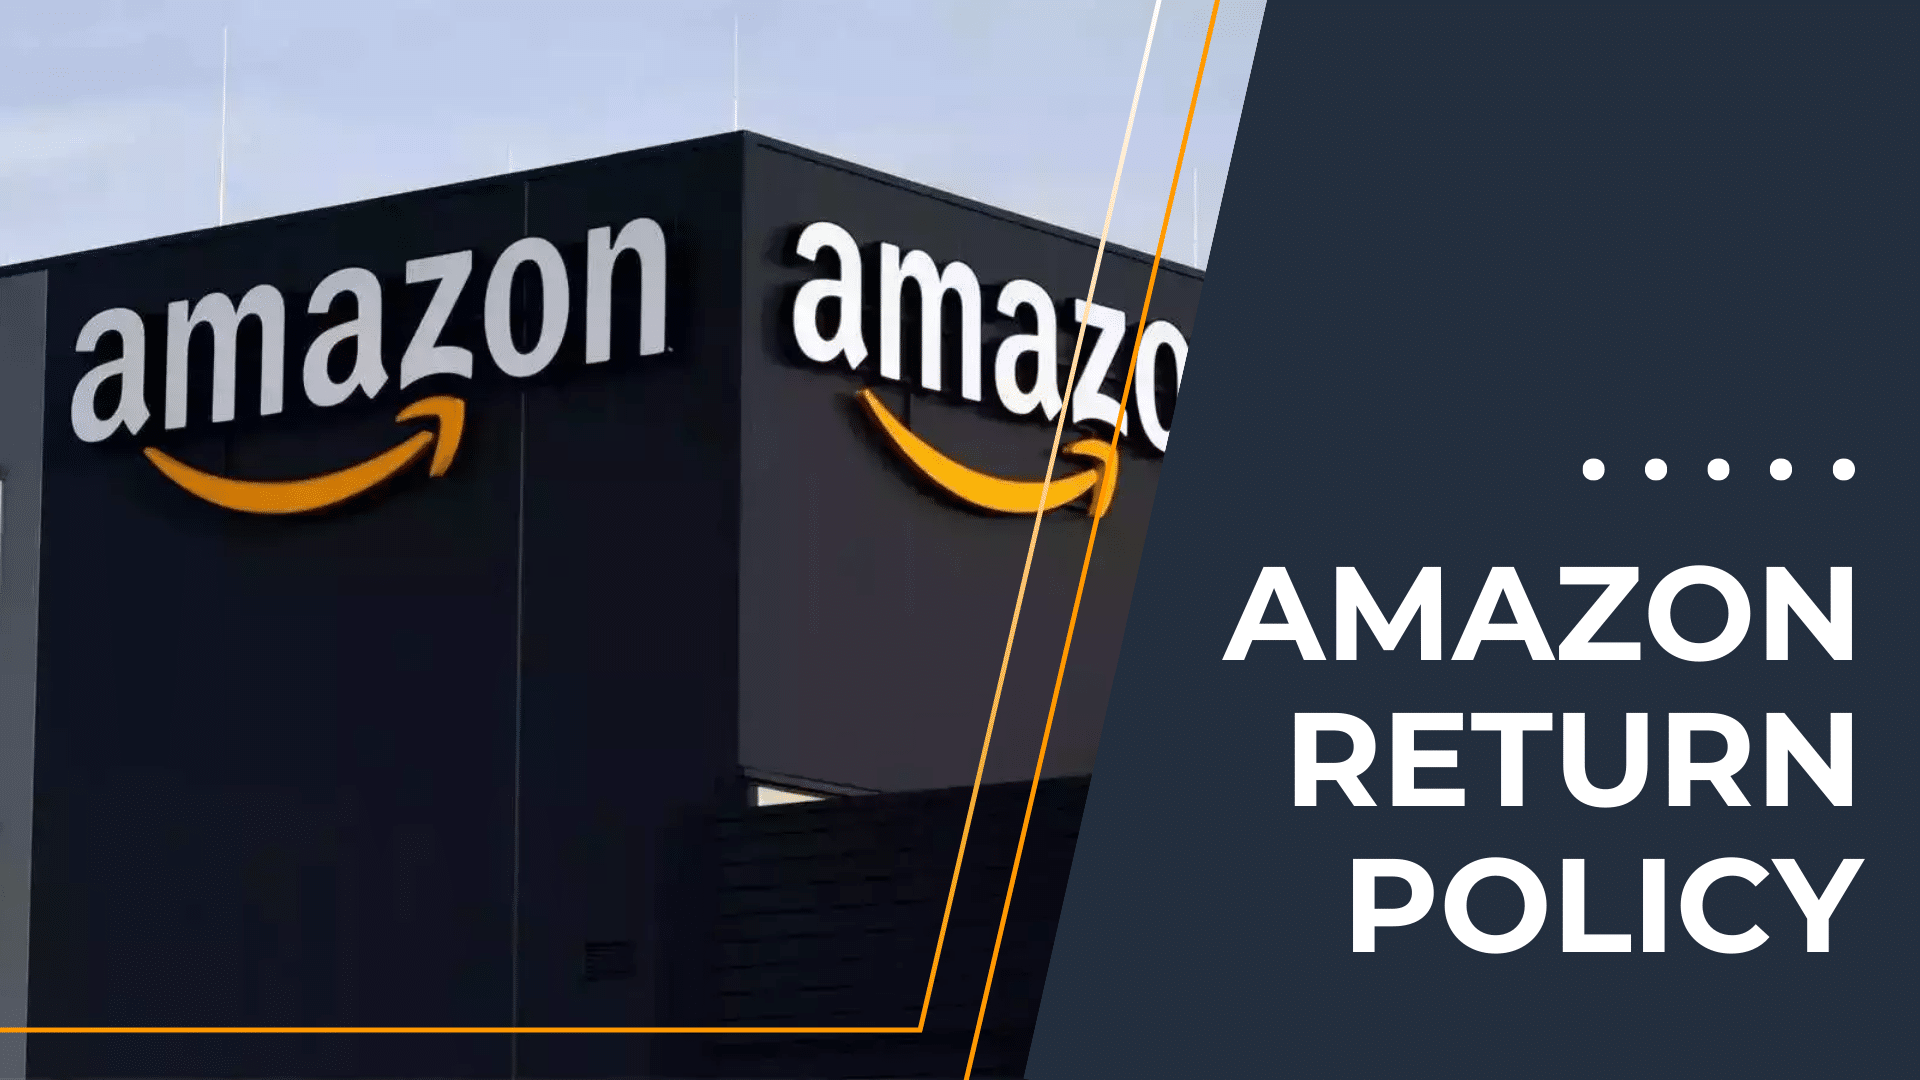 Amazon is Changing Its Return Policy to Cut Costs